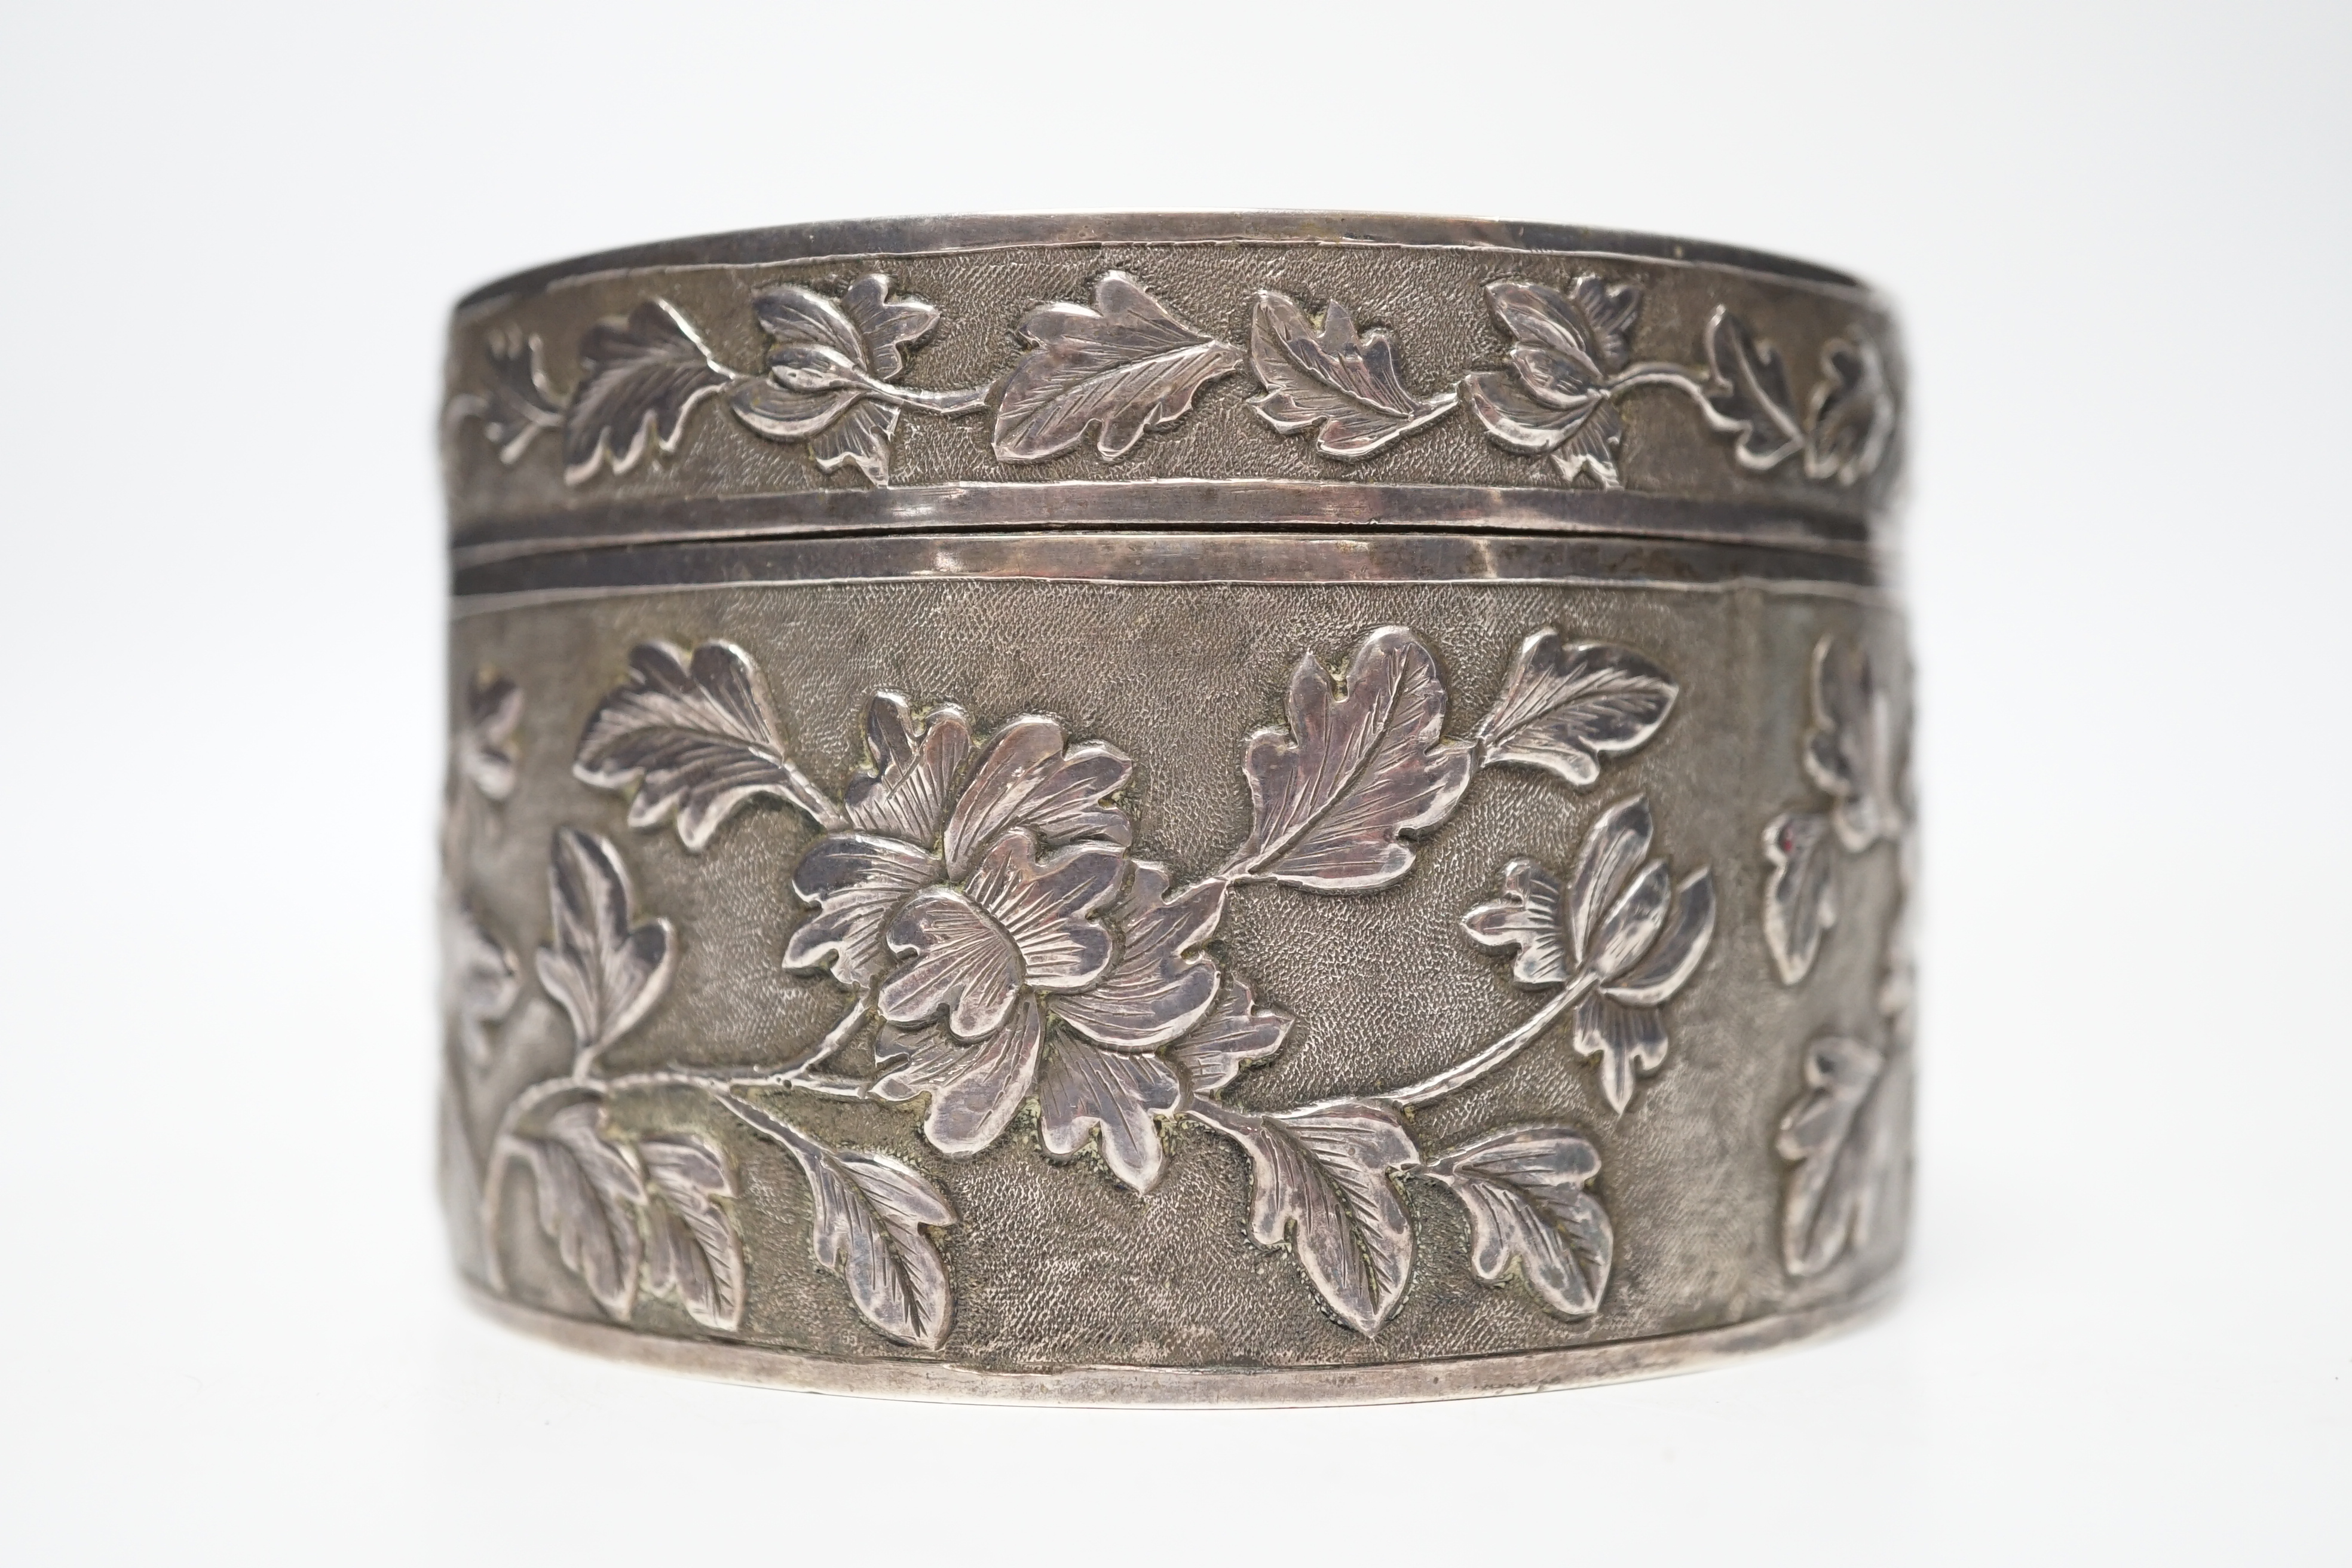 An early 20th century Chinese white metal circular box and cover, maker's mark MK, with foliate decoration and engraved inscription, diameter 82mm, 128 grams.